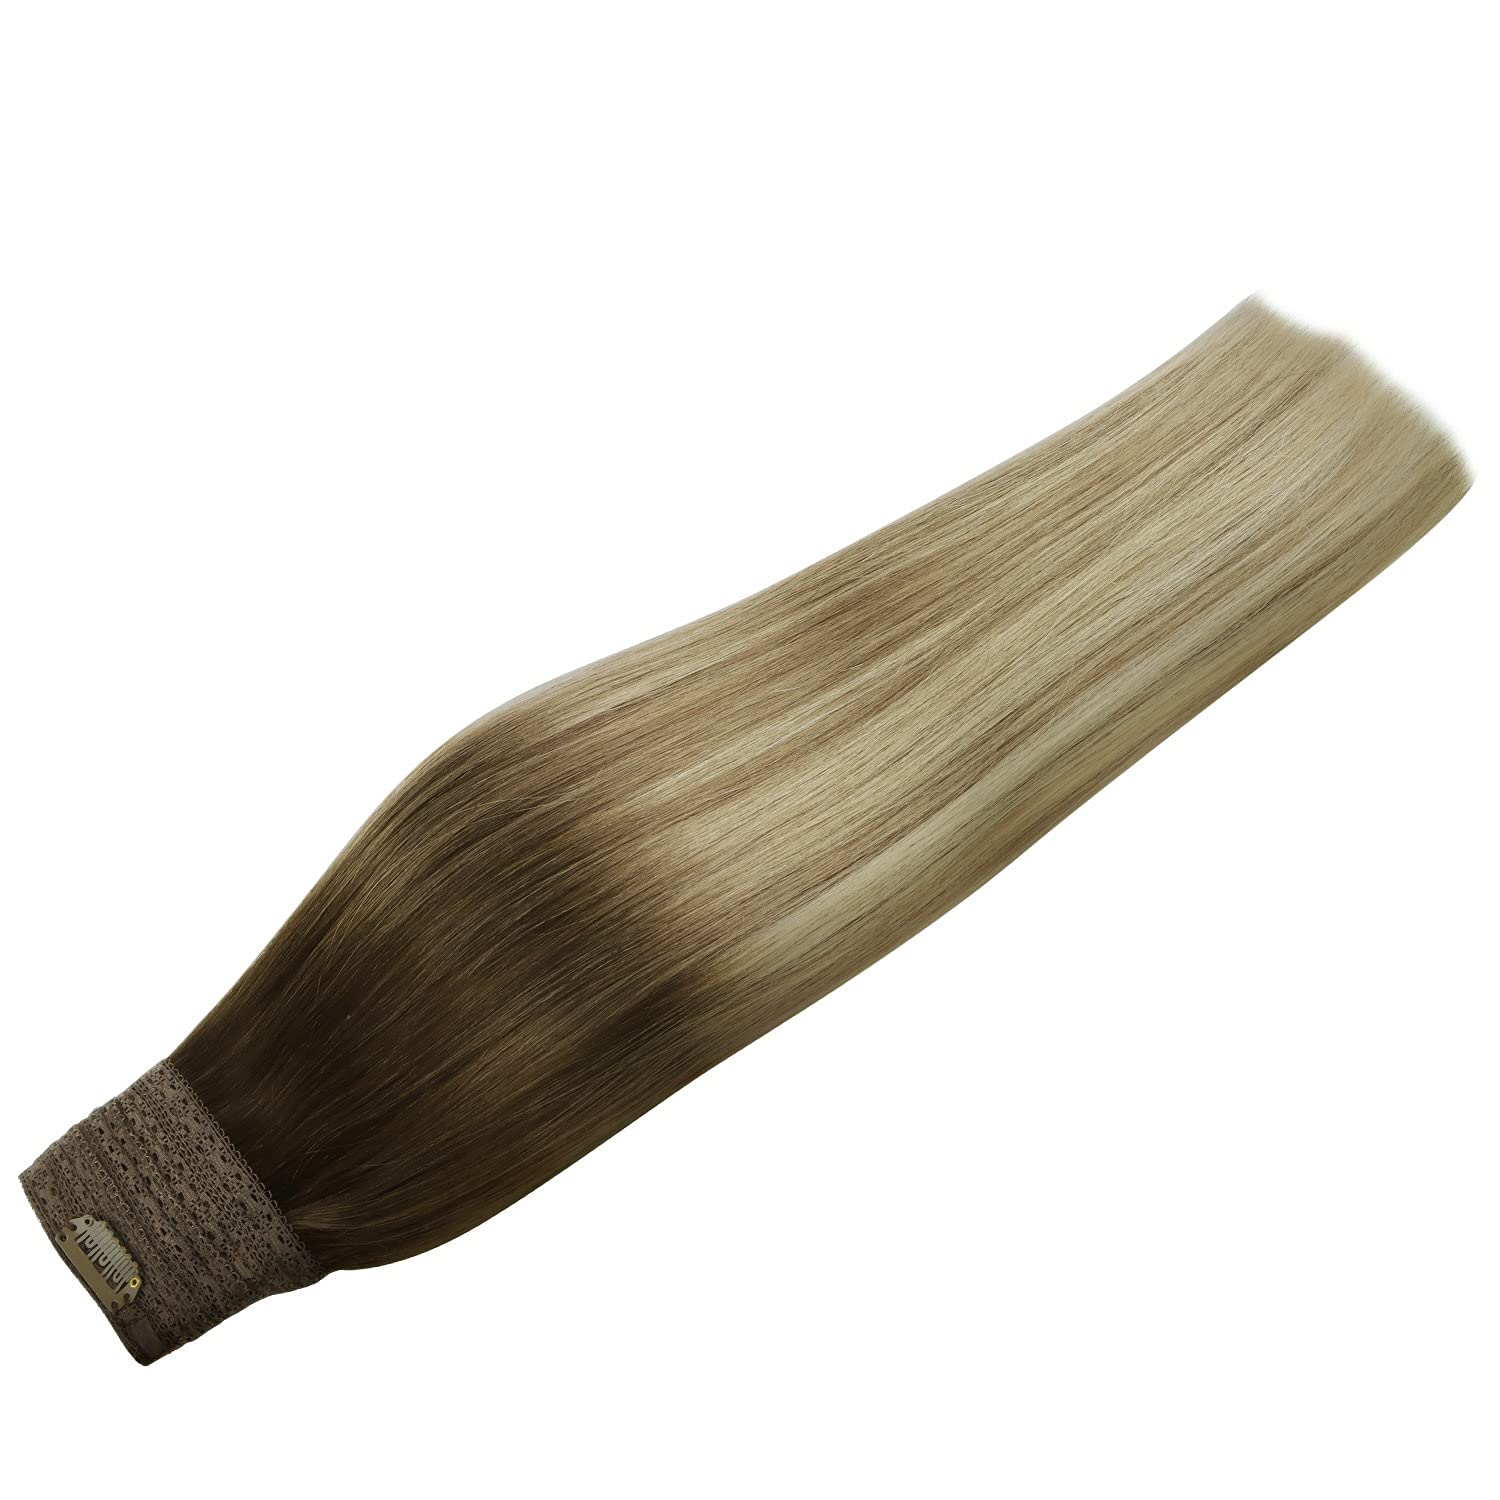 Haloo Hair Extensions, Fish Line Human Hair Extensions, Flip in Remy Hair Extensions, Walnut Brown to Ash Brown and Bleach Blonde Secret Hair Extension, Straight Hidden Wire Hair Extensions, 12 inch